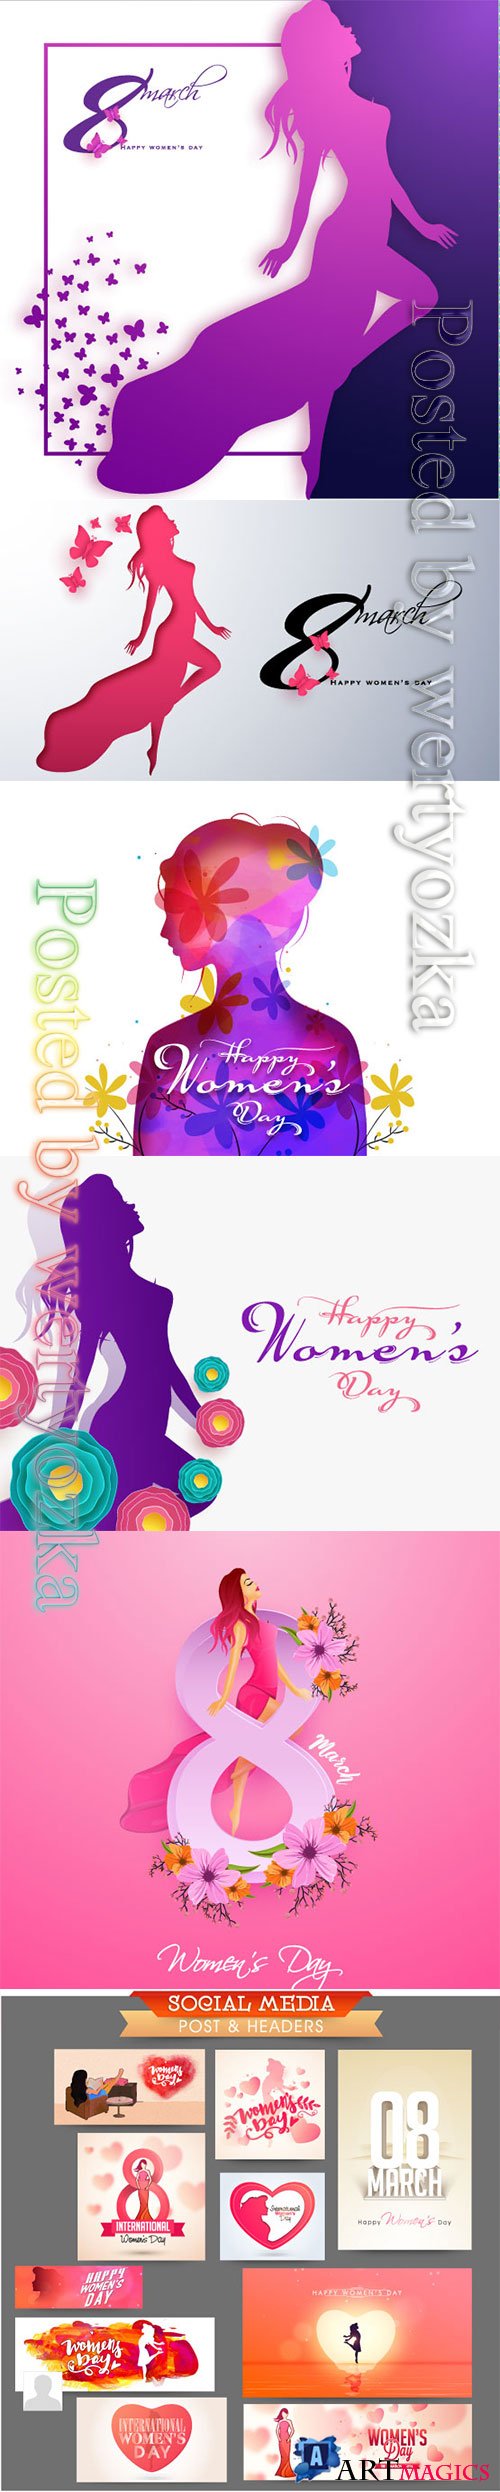 Happy Women's Day greeting card design with beautiful lady